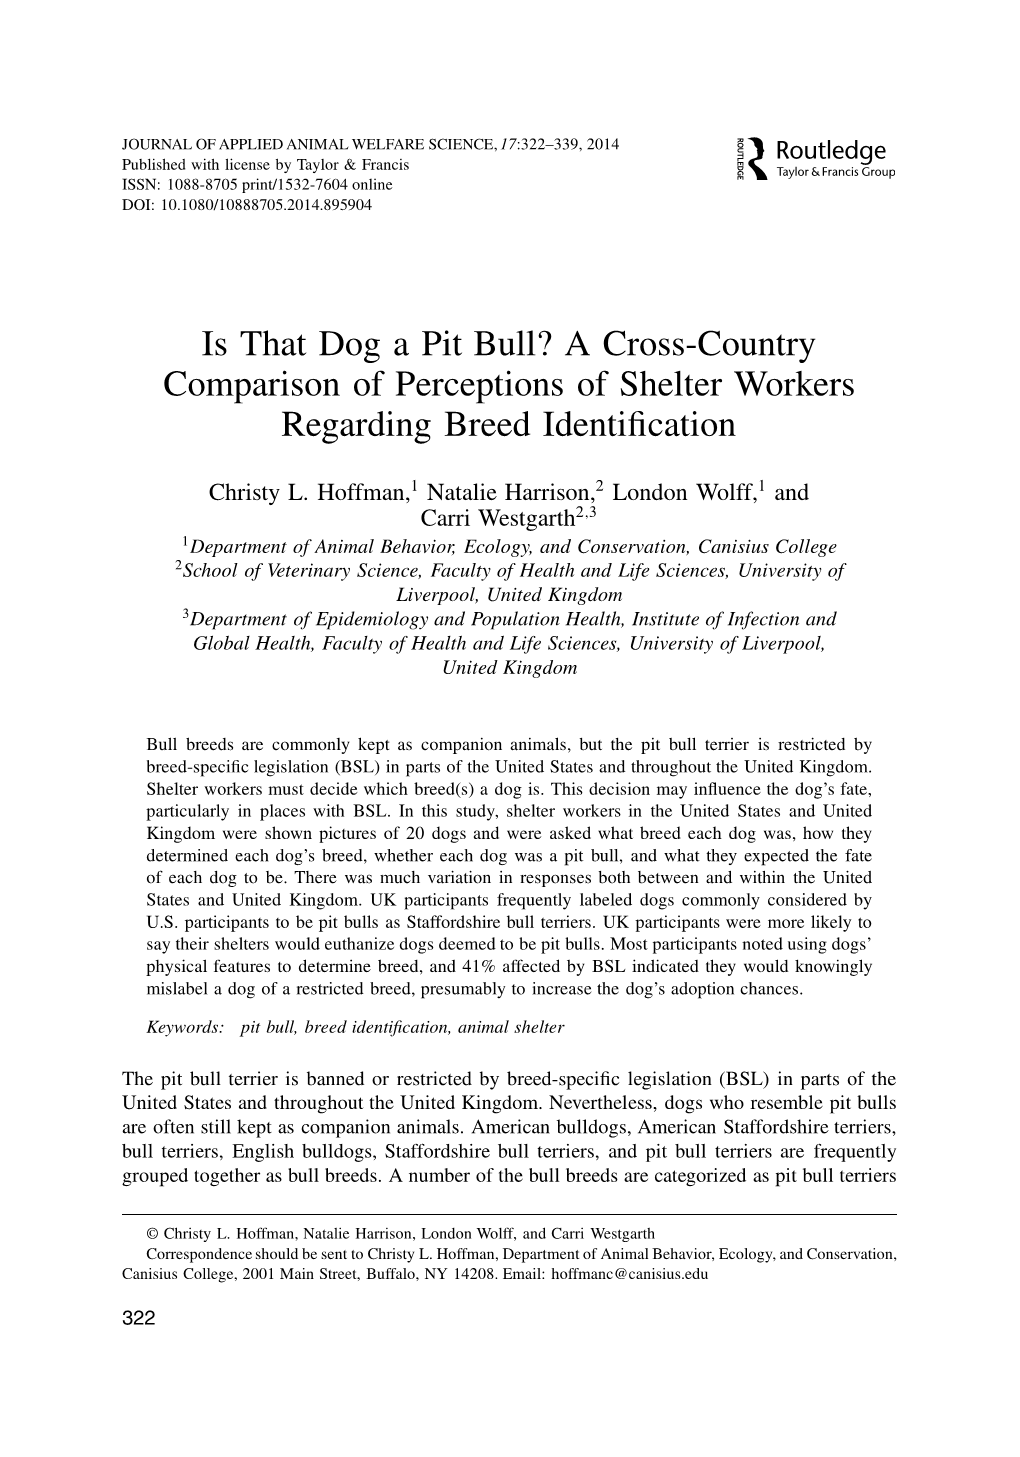 Is That Dog a Pit Bull? a Cross-Country Comparison of Perceptions of Shelter Workers Regarding Breed Identiﬁcation